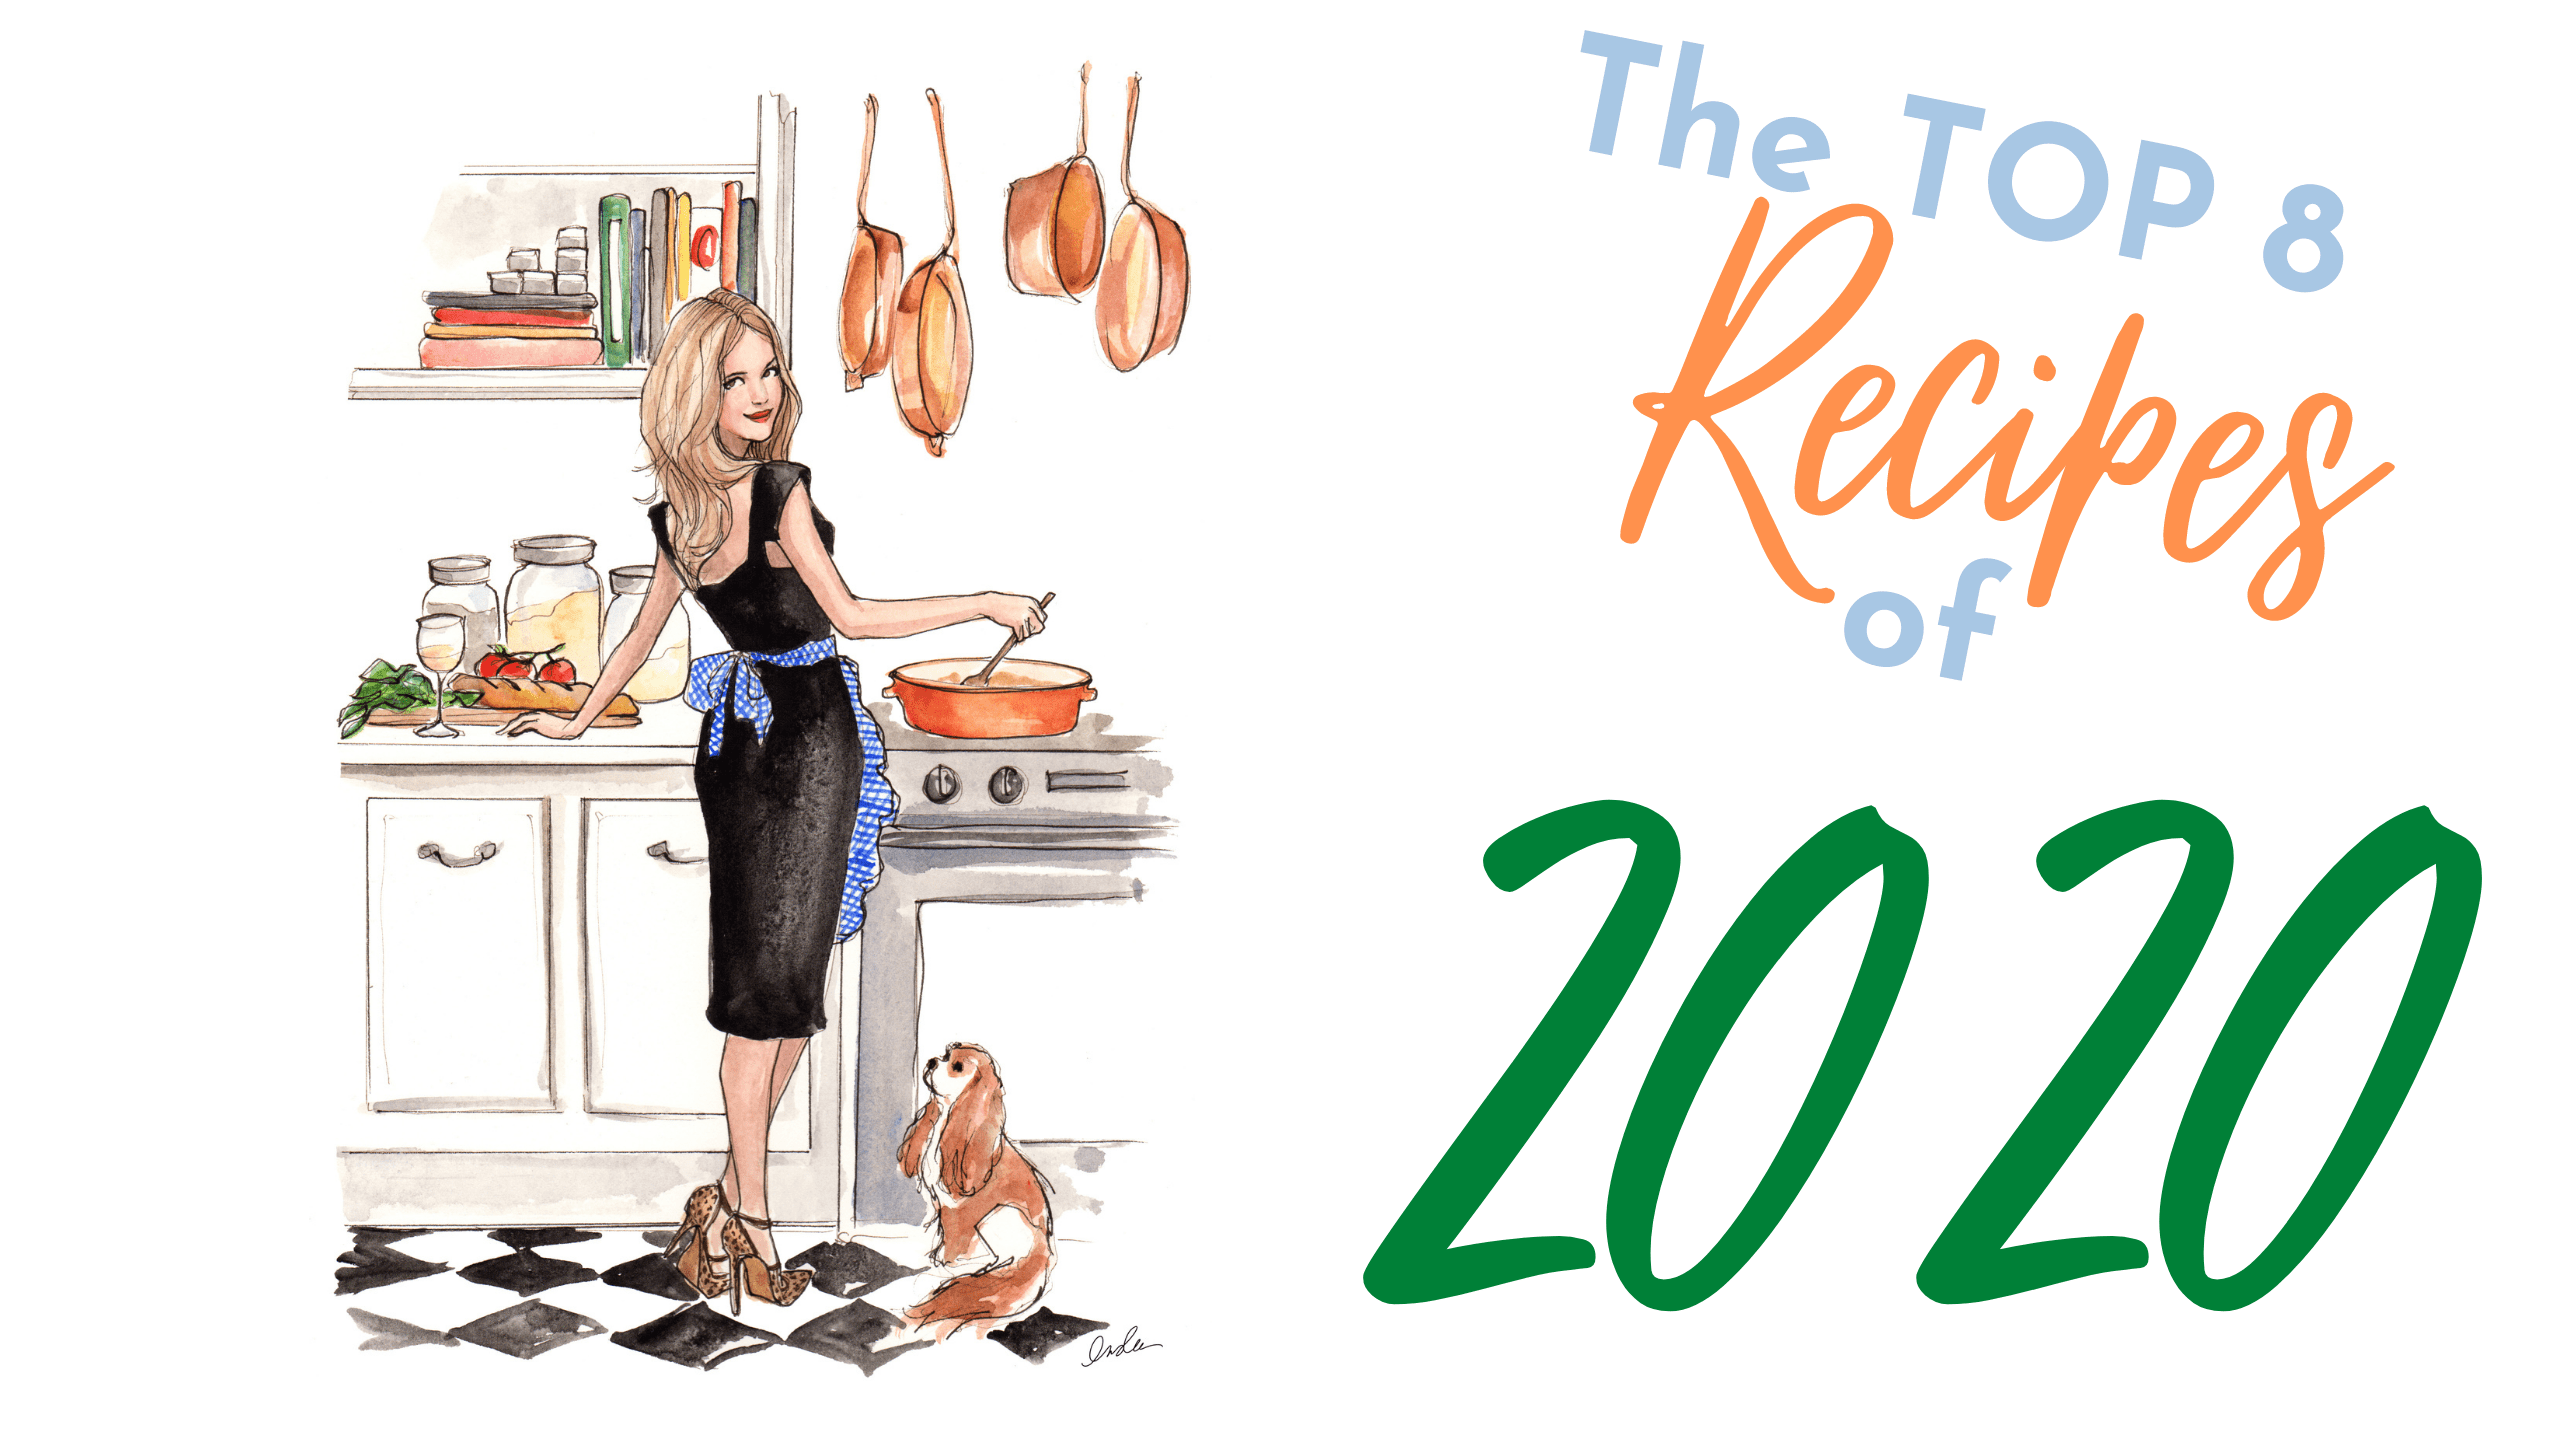 The TOP Recipes of 2020